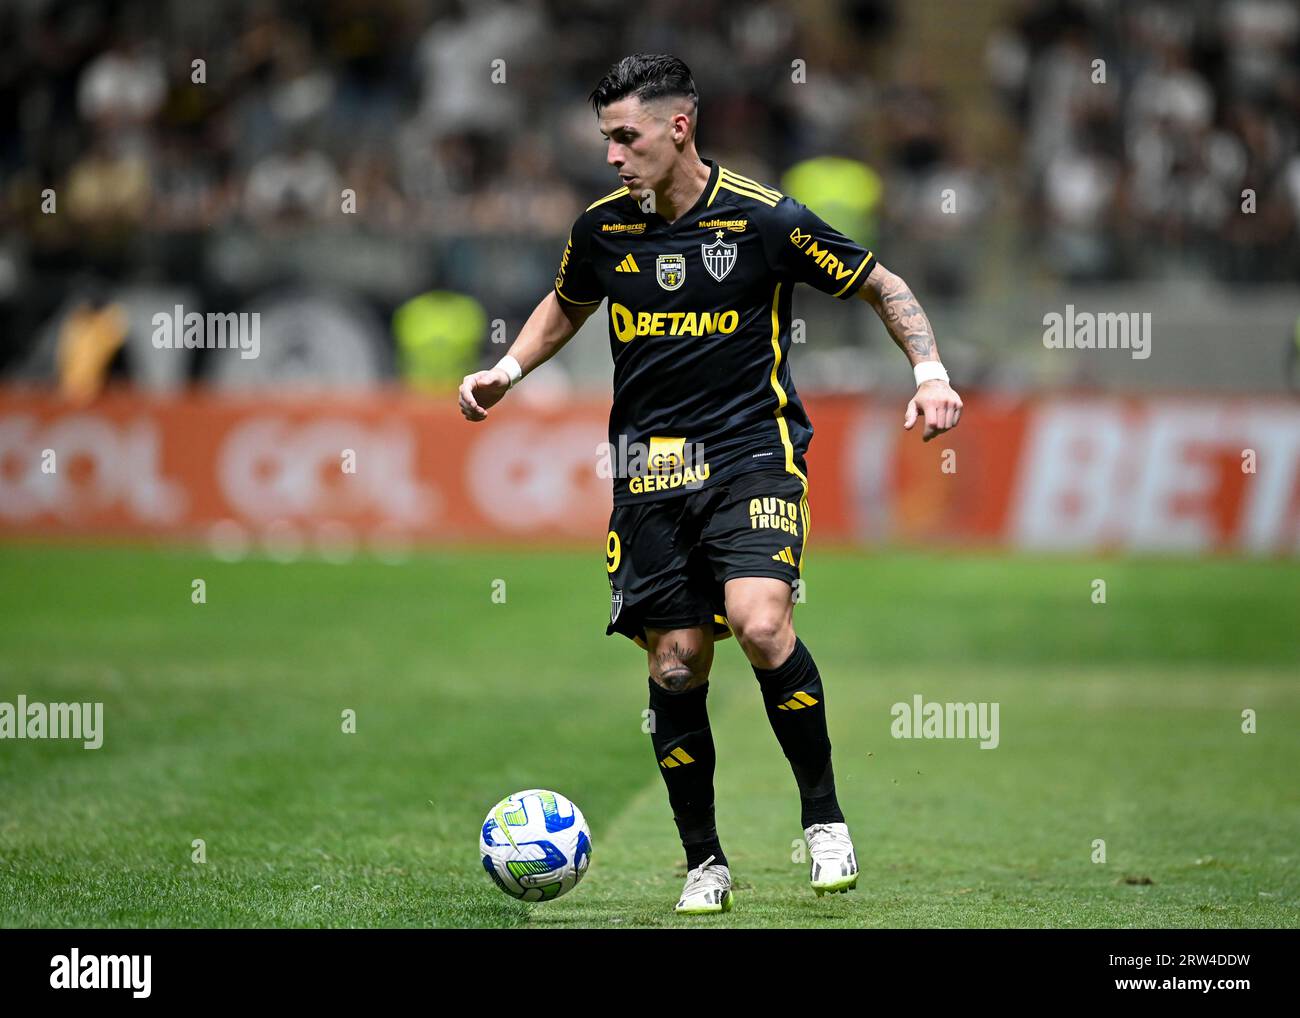 Belo Horizonte, Brazil. 16th Sep, 2023. Arena MRV Cristian Pavon of Atletico Mineiro, during the match between Atletico Mineiro and Botafogo, in the 23rd round of the Brazilian Championship, at Arena MRV, this Saturday 16. 30761 (Gledston Tavares /SPP) Credit: SPP Sport Press Photo. /Alamy Live News Stock Photo